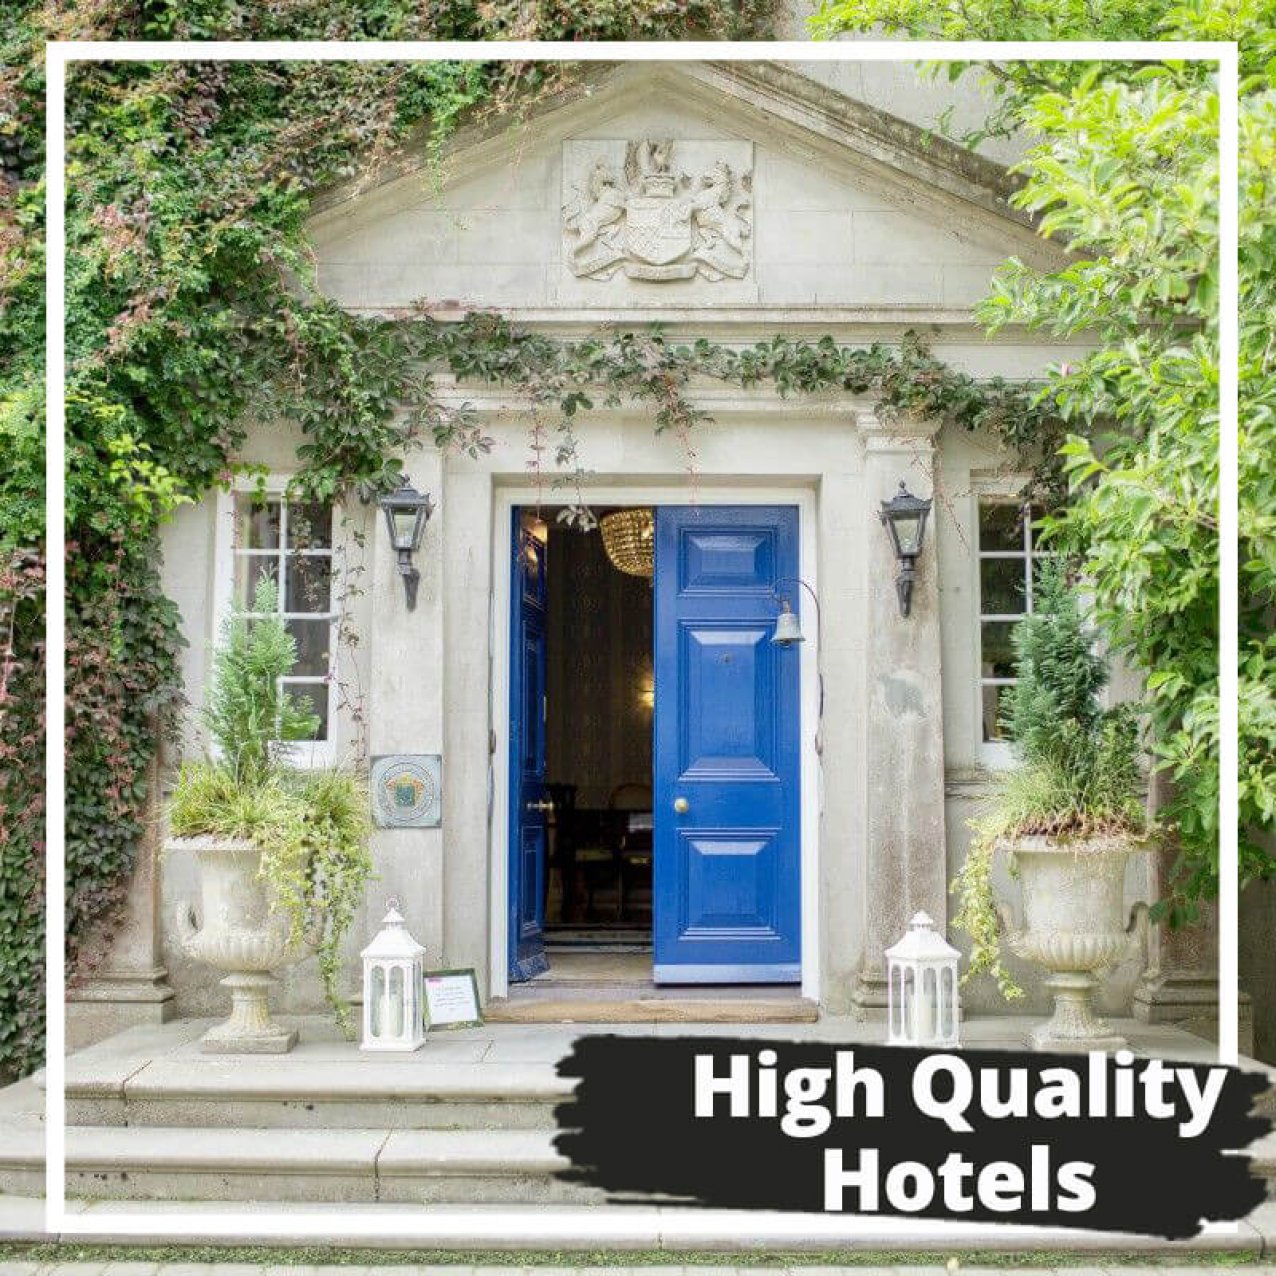 High Quality hotels photo wall blue door